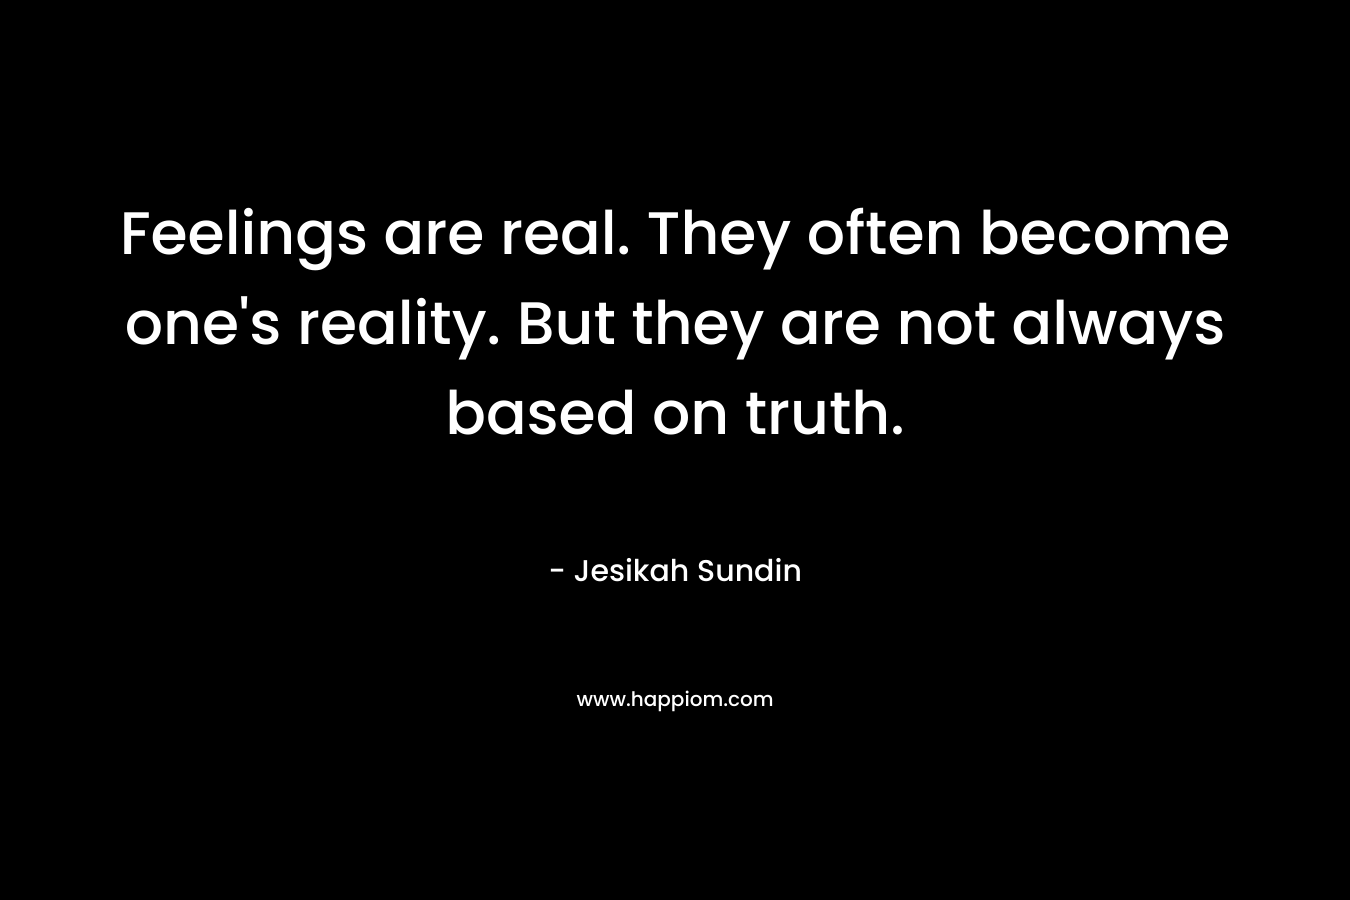 Feelings are real. They often become one’s reality. But they are not always based on truth. – Jesikah Sundin